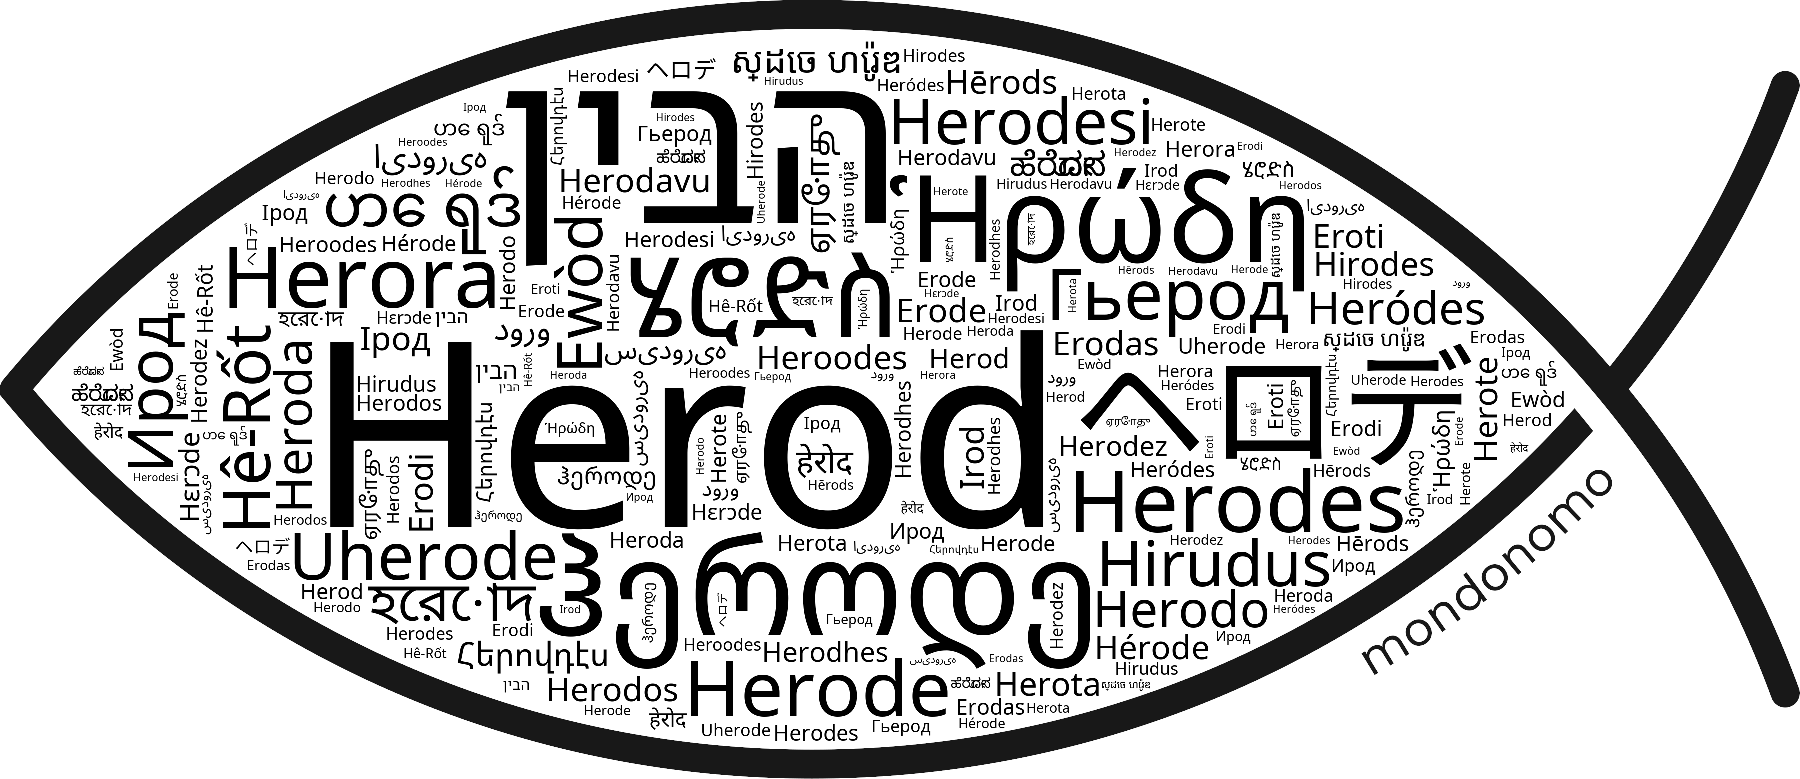 Name Herod in the world's Bibles